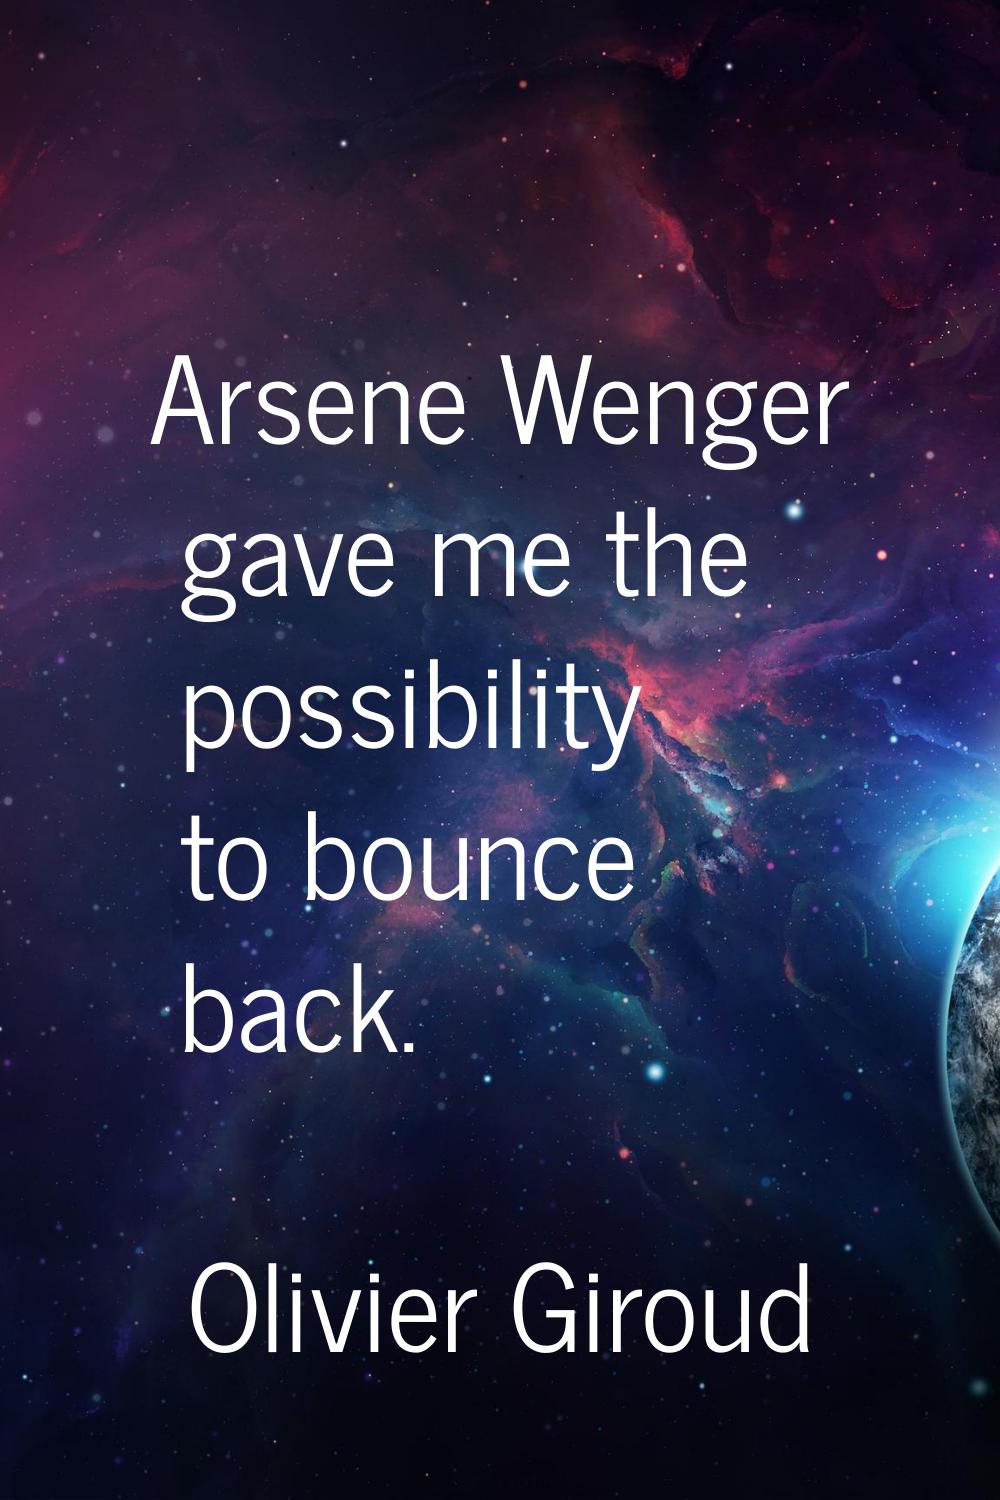 Arsene Wenger gave me the possibility to bounce back.